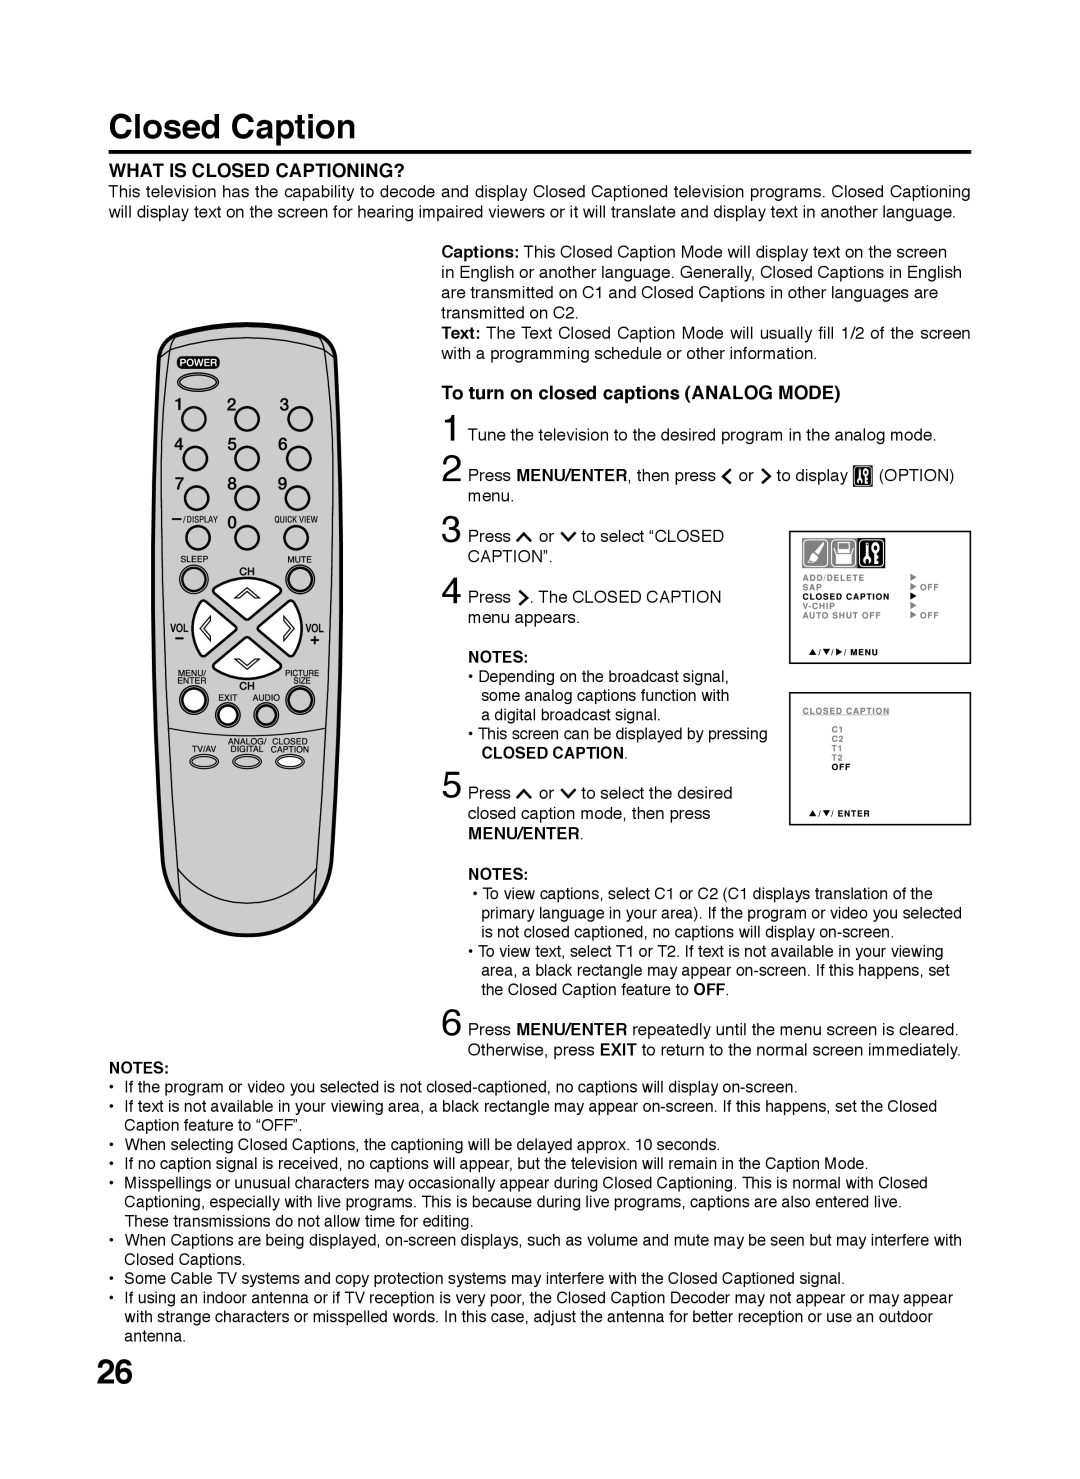 Zenith 206-3923, S2898A, C27H26B warranty What Is Closed Captioning?, To turn on closed captions ANALOG MODE, Menu/Enter 